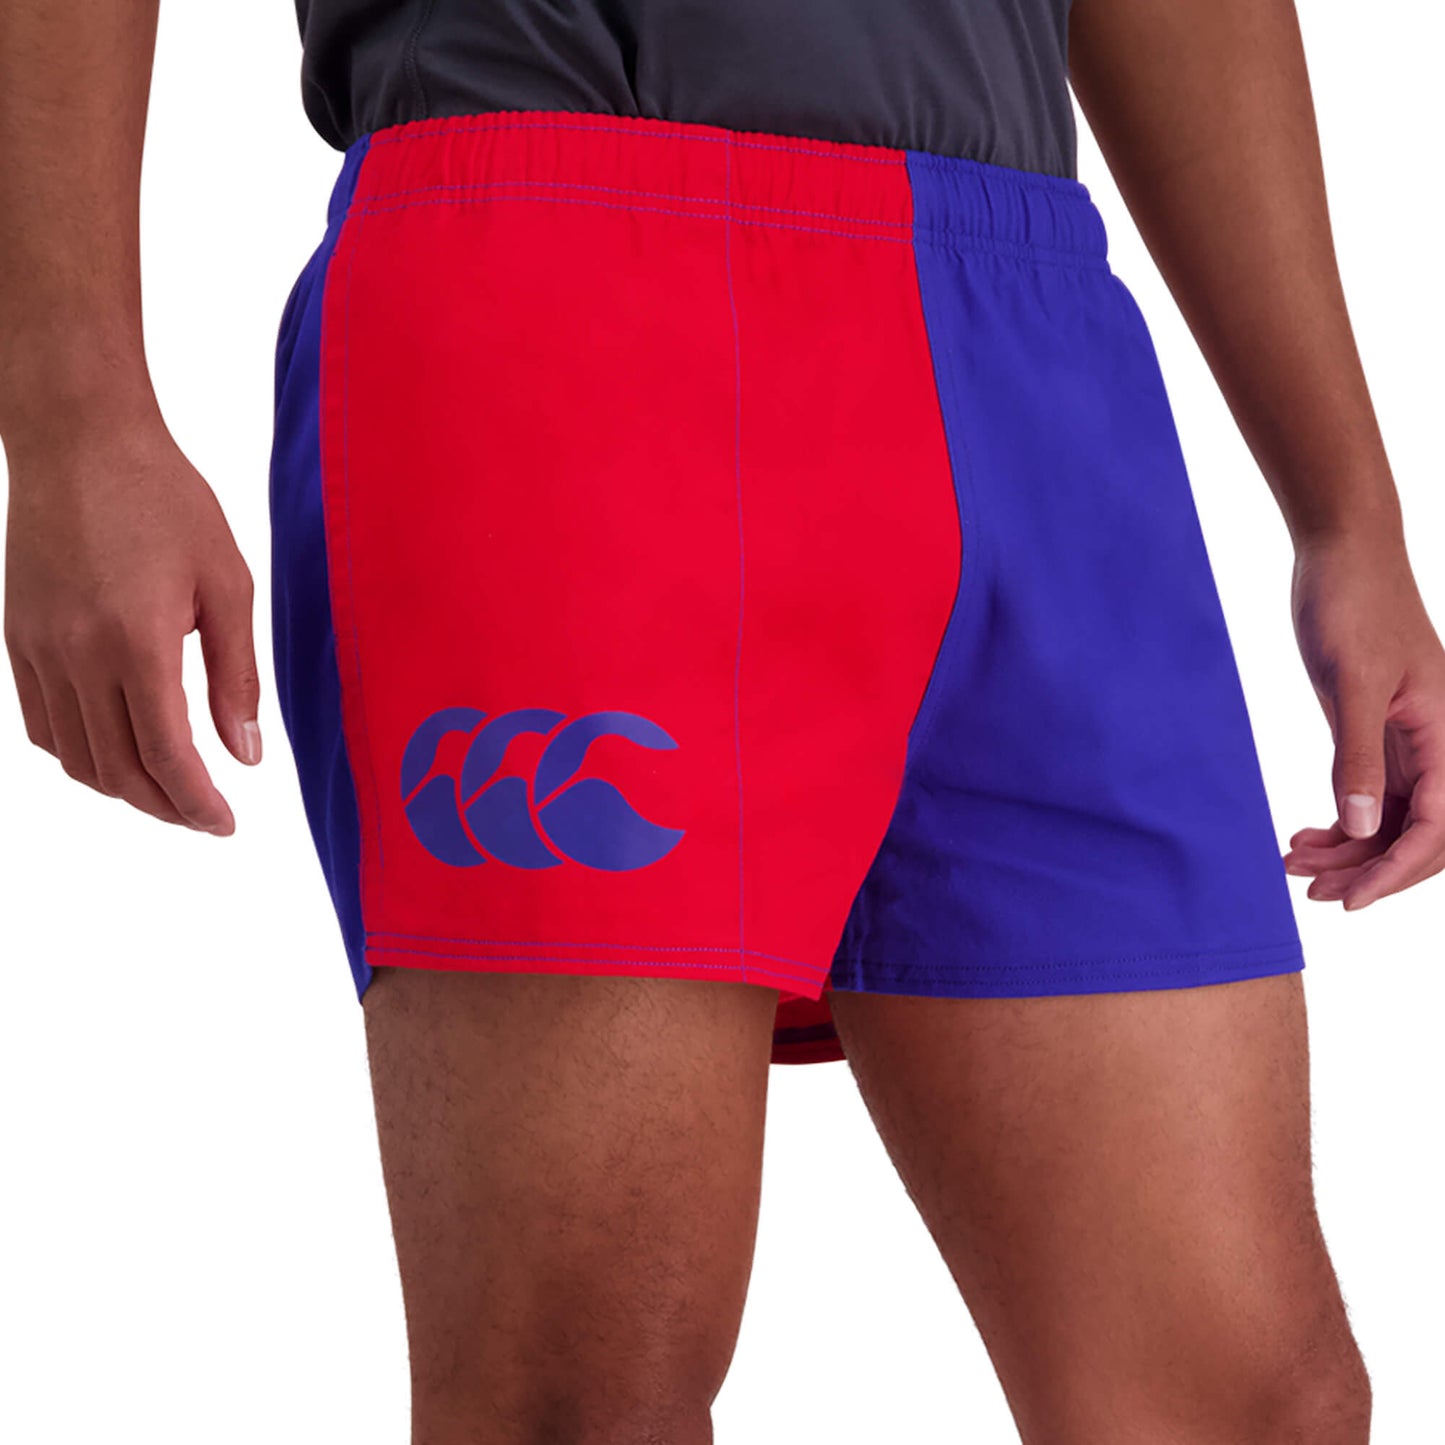 Limited Edition Canterbury Harlequin Short (Unisex) - Flag Red/Blue